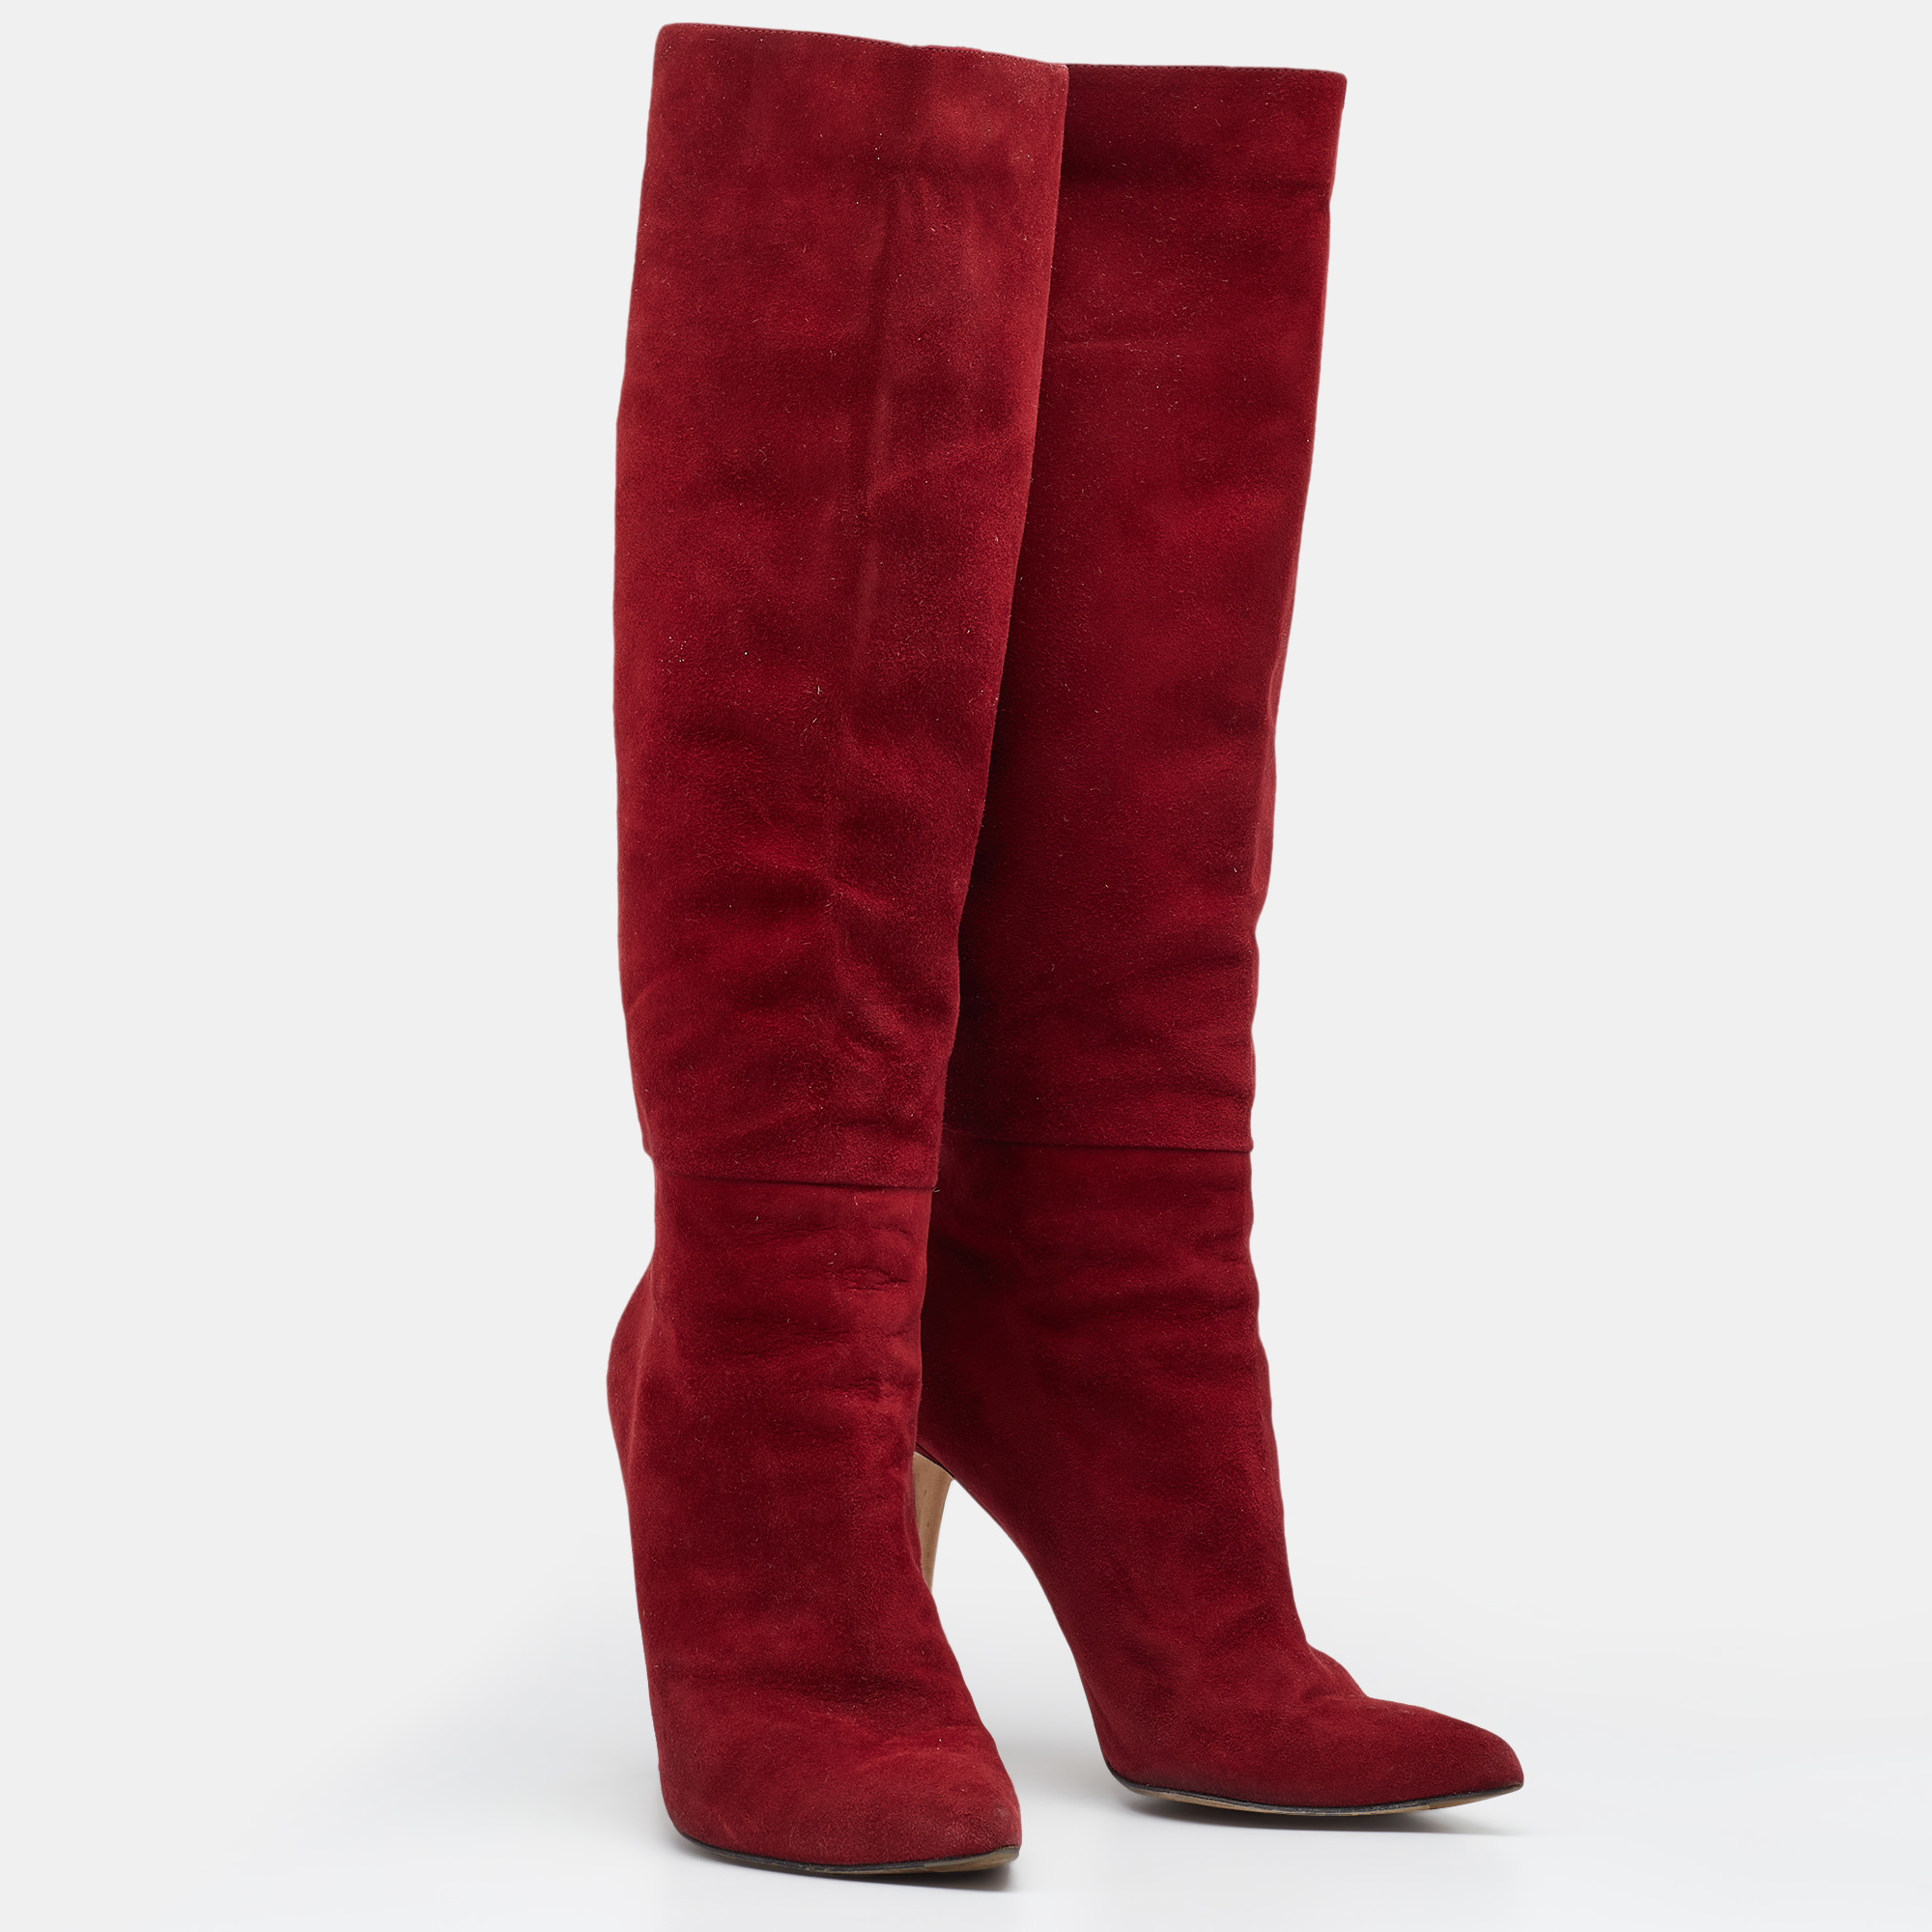 Sergio Rossi Red Suede Knee Length Boots Size 39